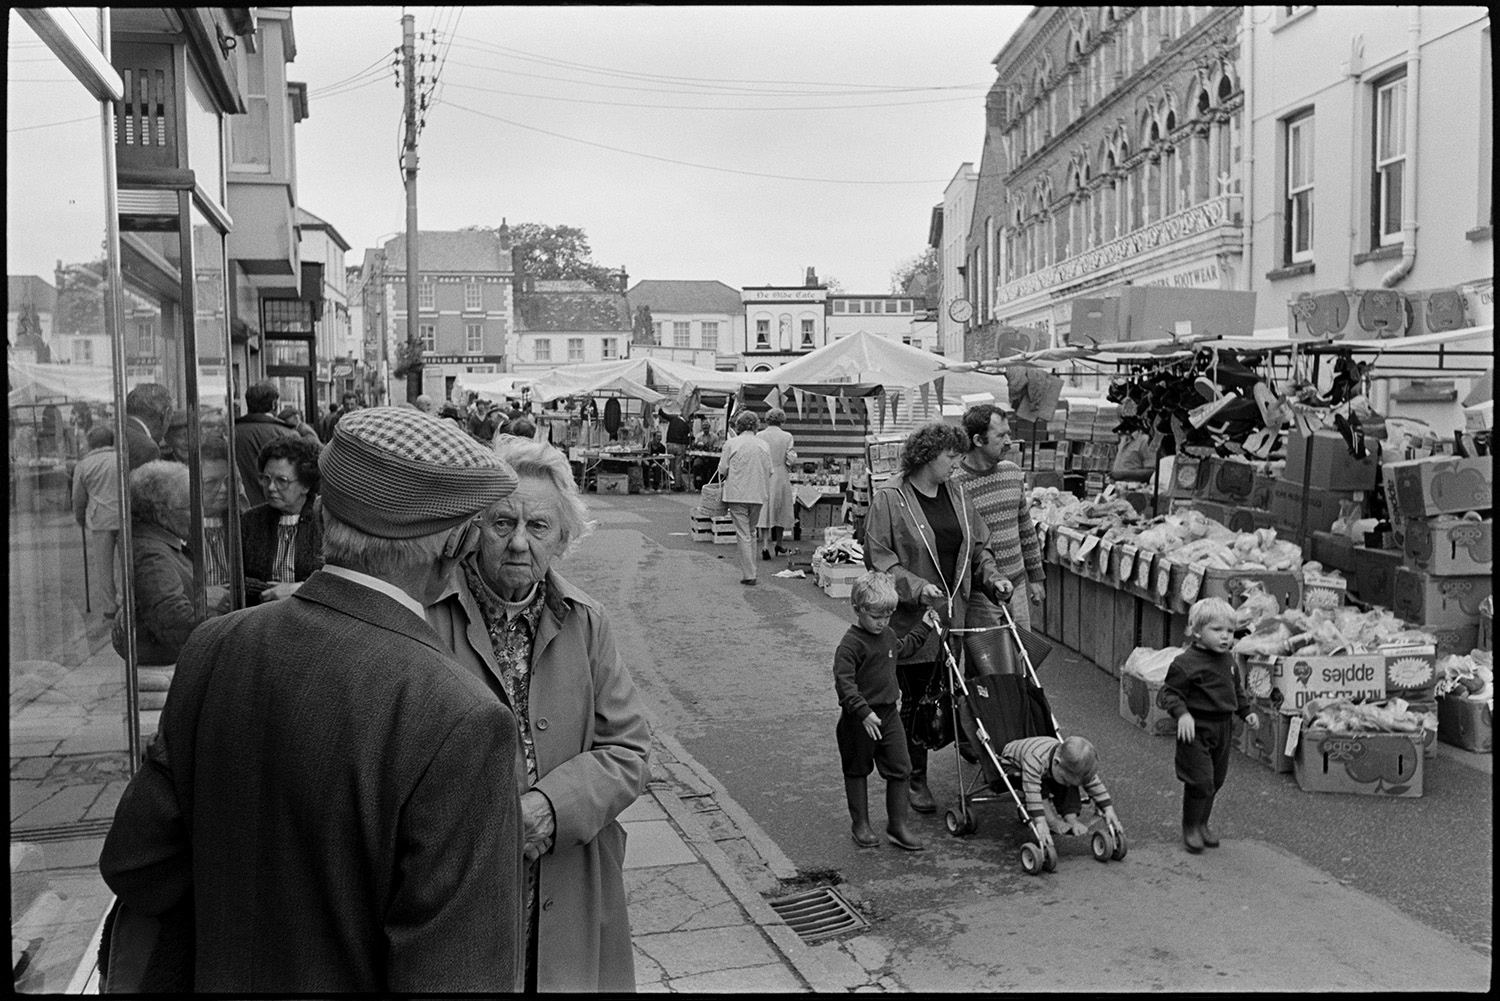 Town streets on market day clothes shop, people chatting. 
[People shopping in Holsworthy market. A family are walking past a stall selling shoes and a man and woman are talking in the foreground. Other market stalls can be seen in the background.]